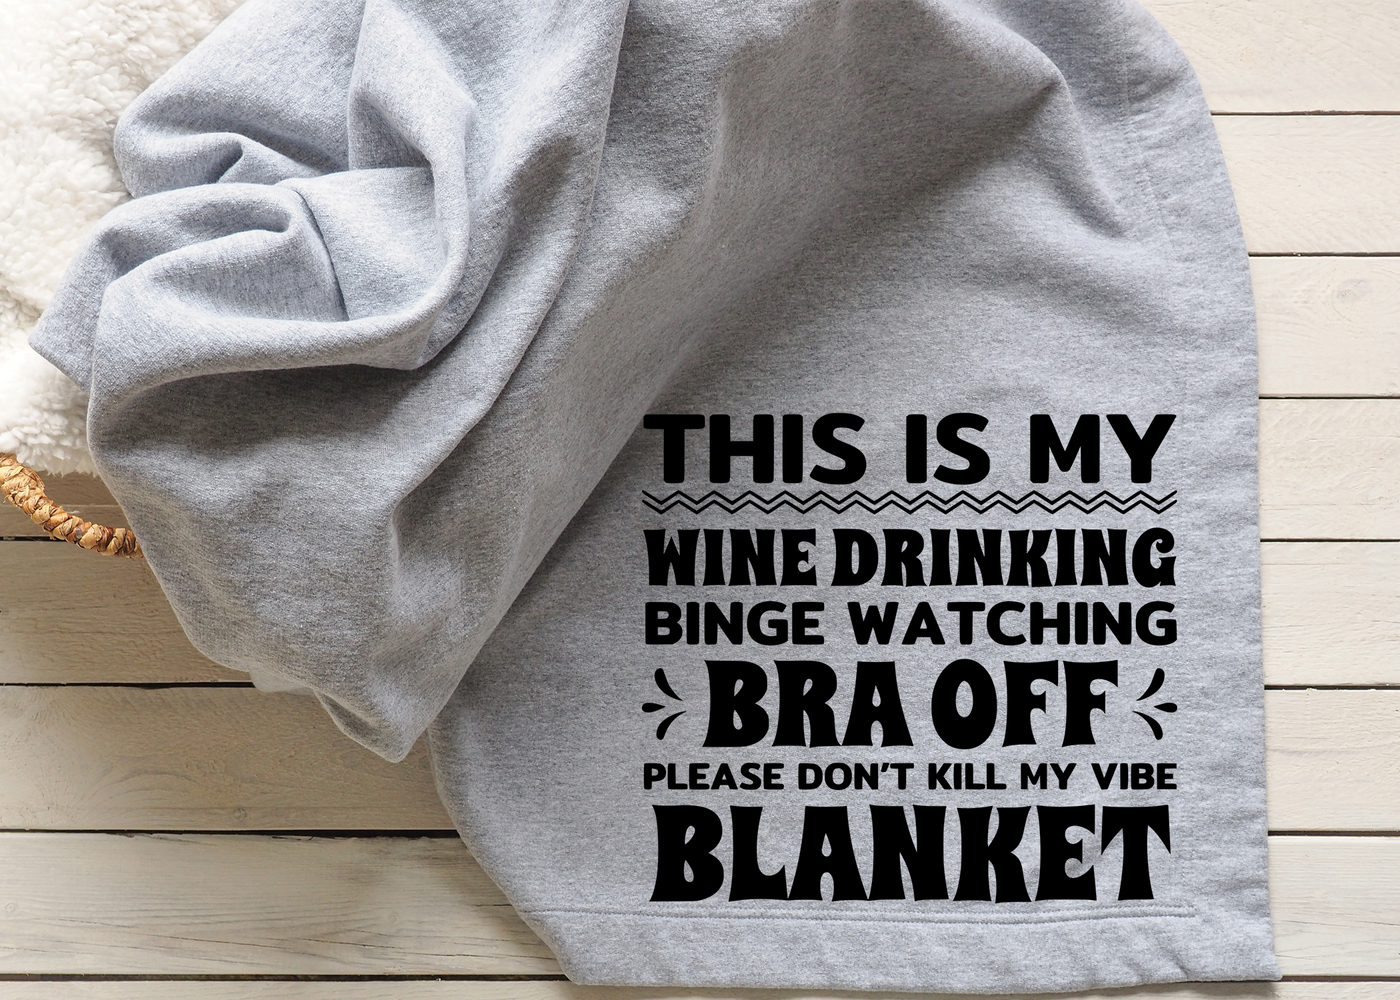 This is my wine drinking blanket